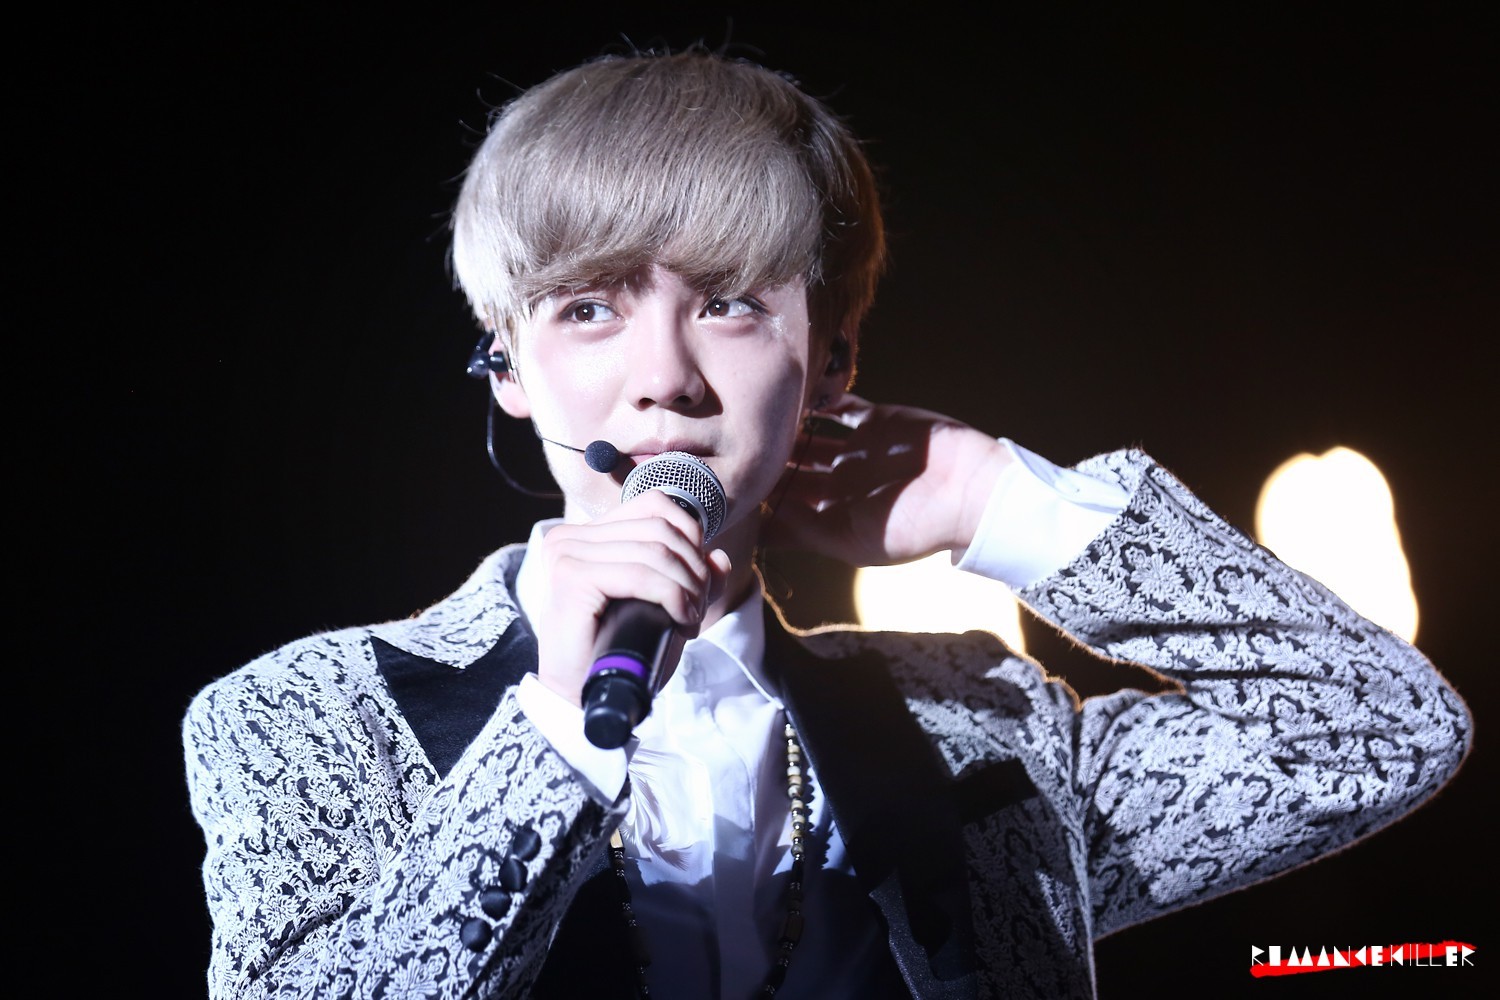 [FANTAKEN] 140727 EXO Concert "The Lost Planet" in Changsha [116P] Cfcf05ecgw1eitn63l6uxj215o0rs7bc